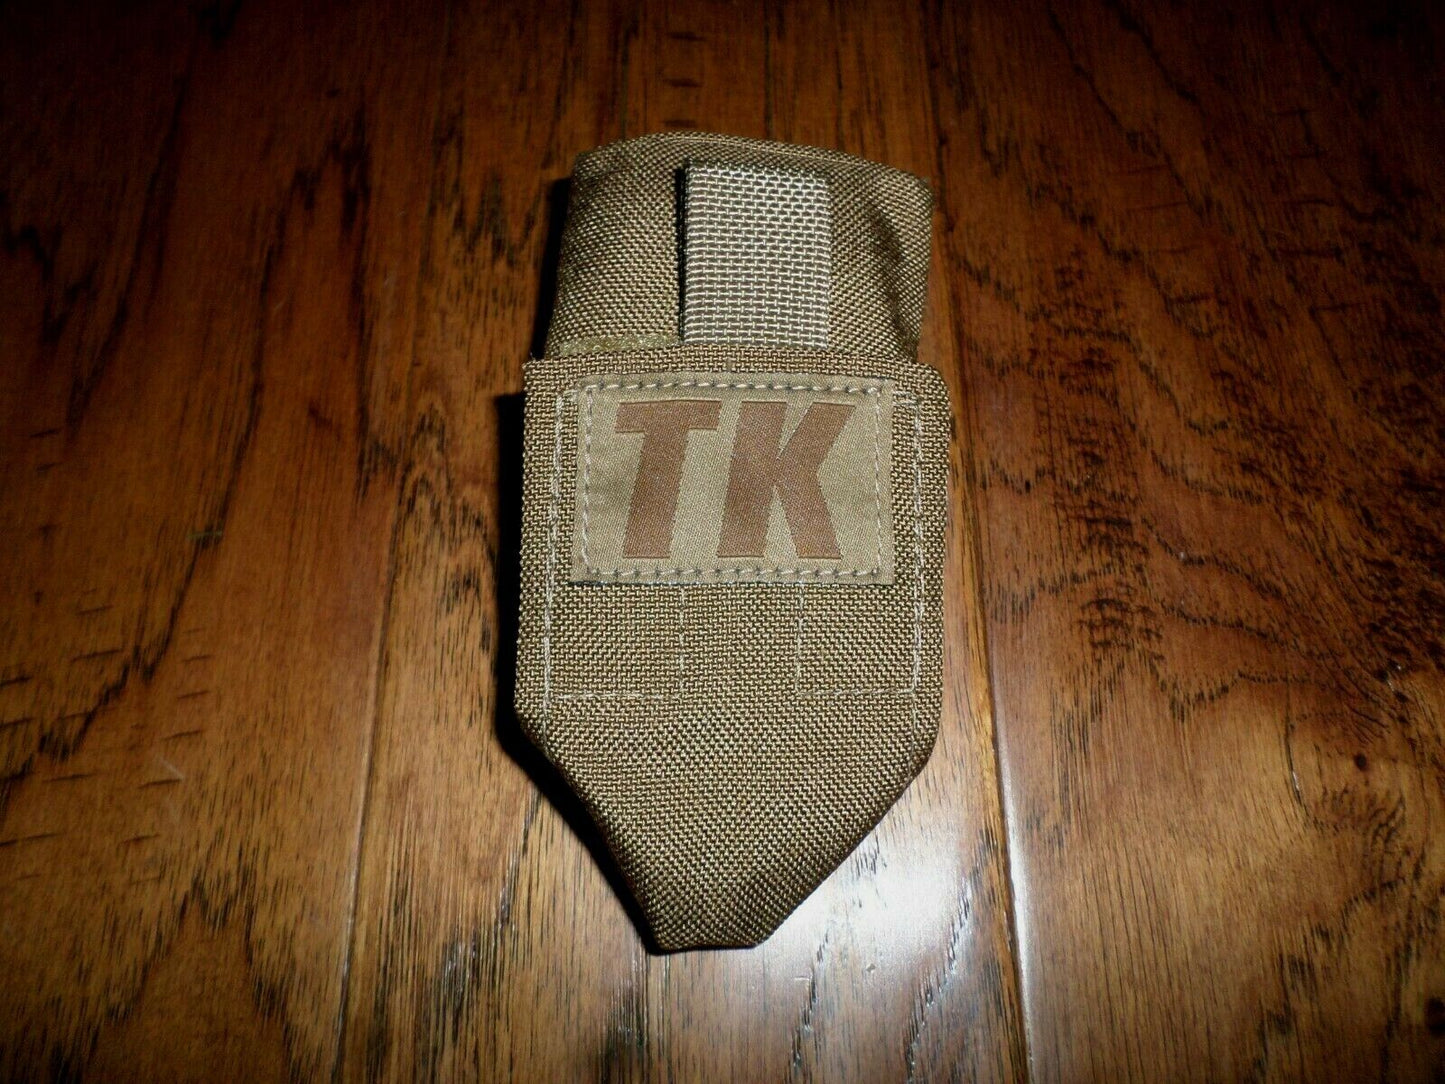 U.S MILITARY MARINE CORPS ISSUE TOURNIQUET DROP FREE POUCH NEW